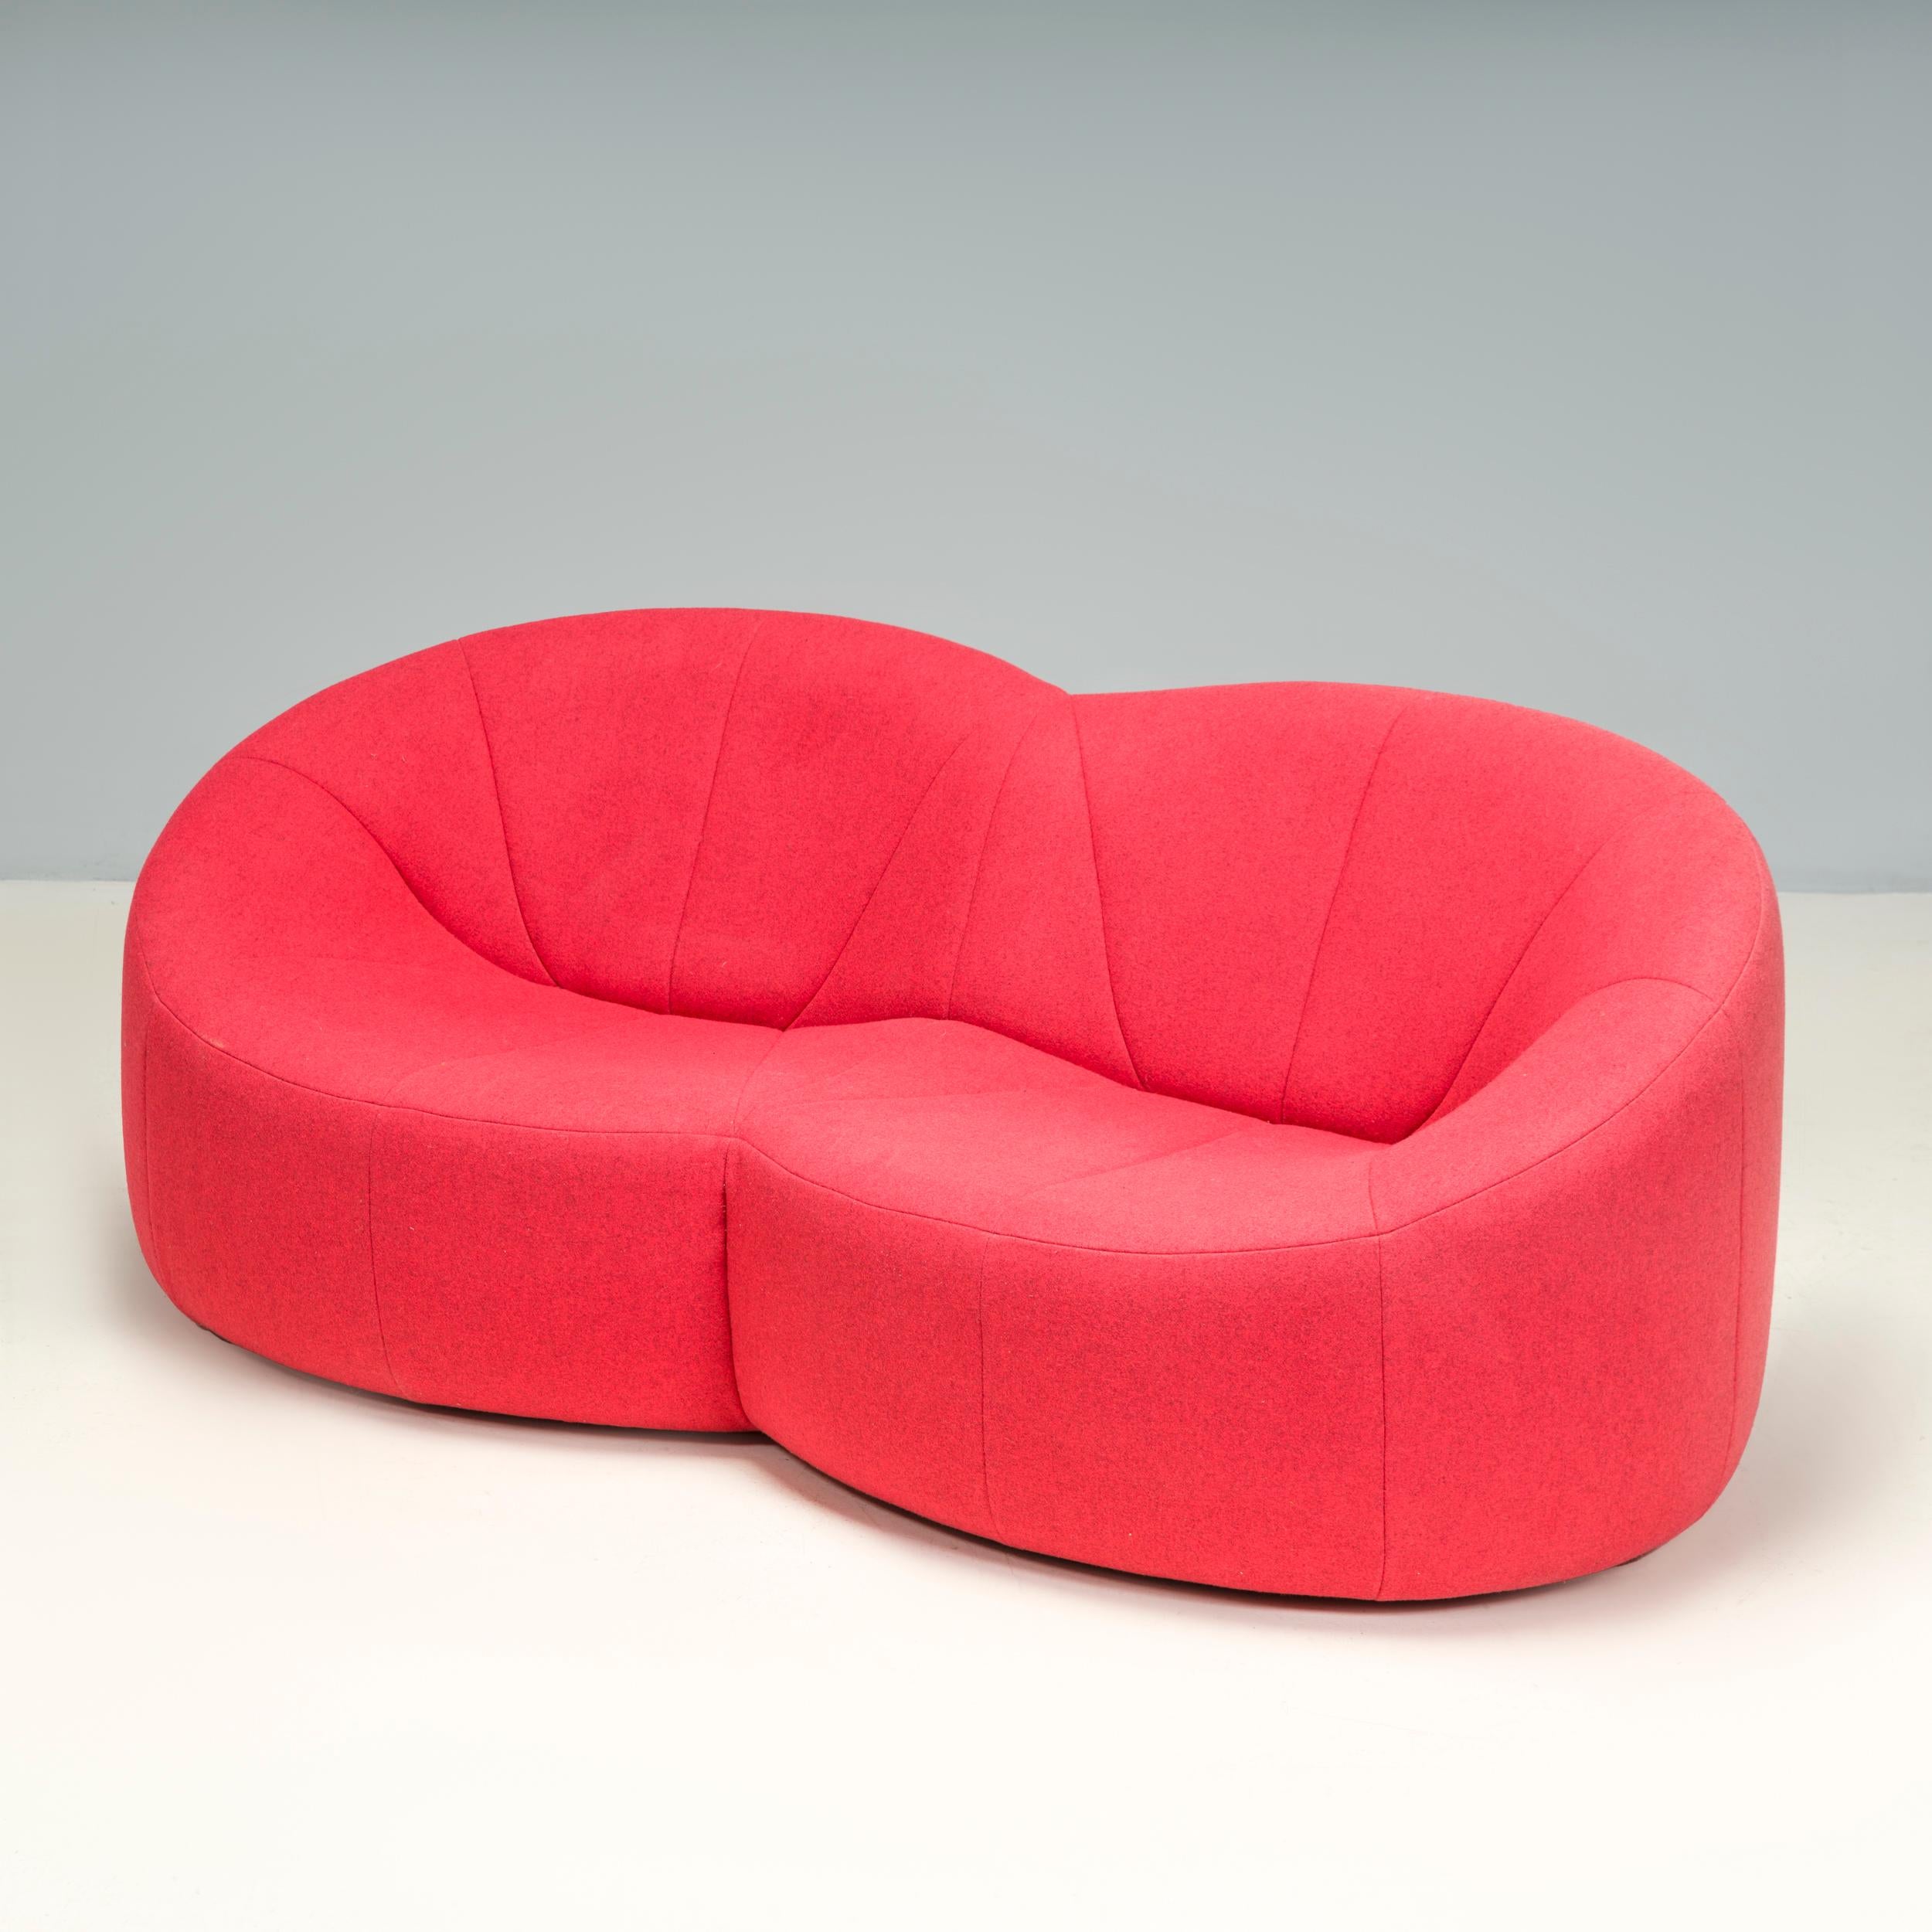 Originally designed by Pierre Paulin in 1971 for the Elysée Palace, the pumpkin sofa was only in production until 1973 by manufacturer Alpha. The iconic design was reintroduced in 2007 in collaboration with Ligne Roset. 

Inspired by the curvaceous